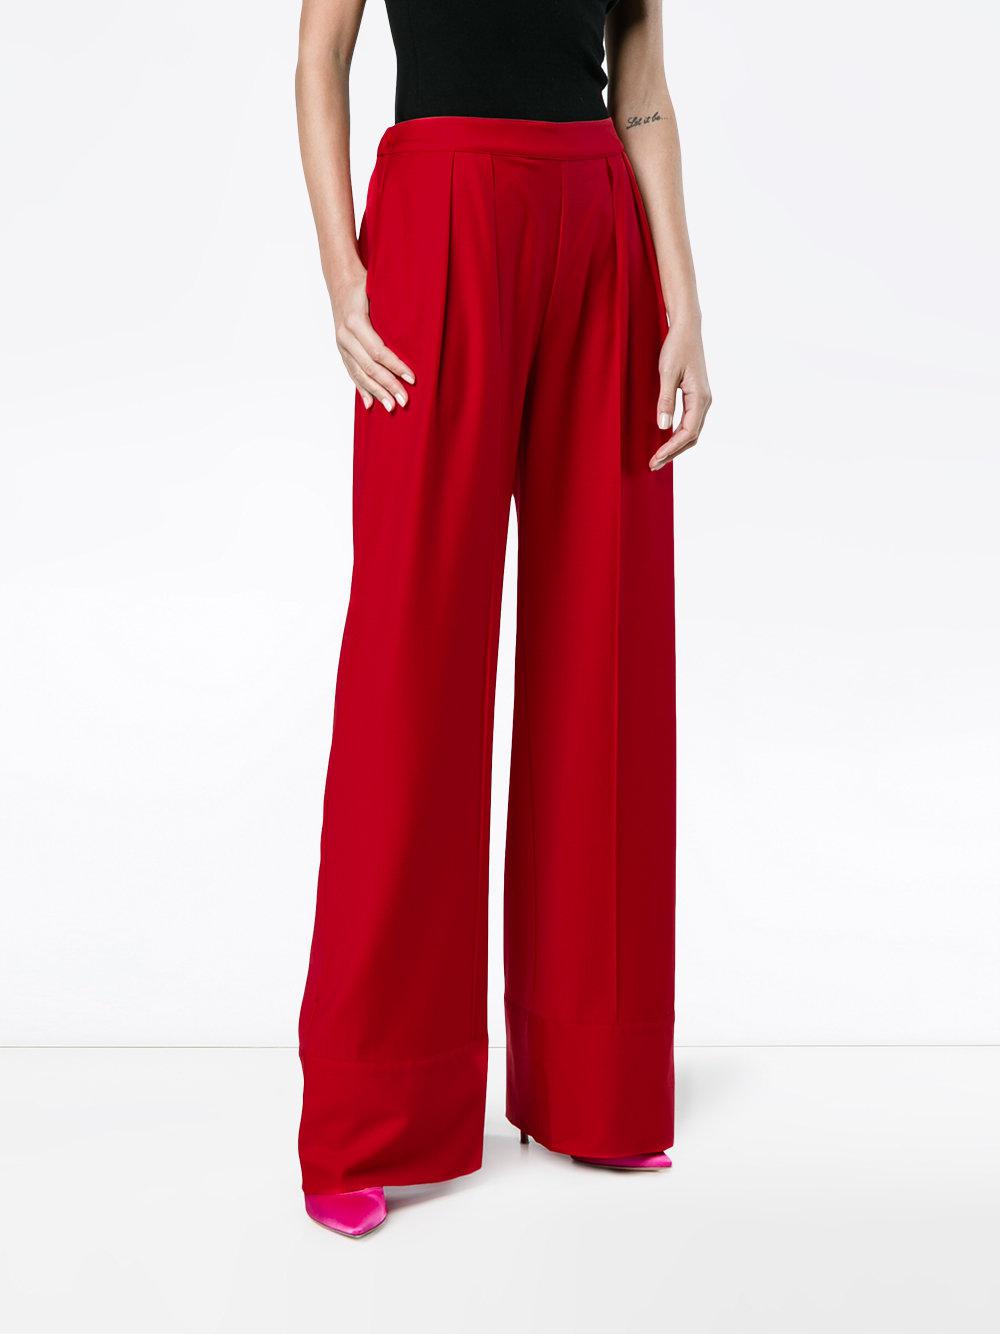 Lyst - Michael Lo Sordo High Waist Wide Leg Trousers in Red - Save 26. ...